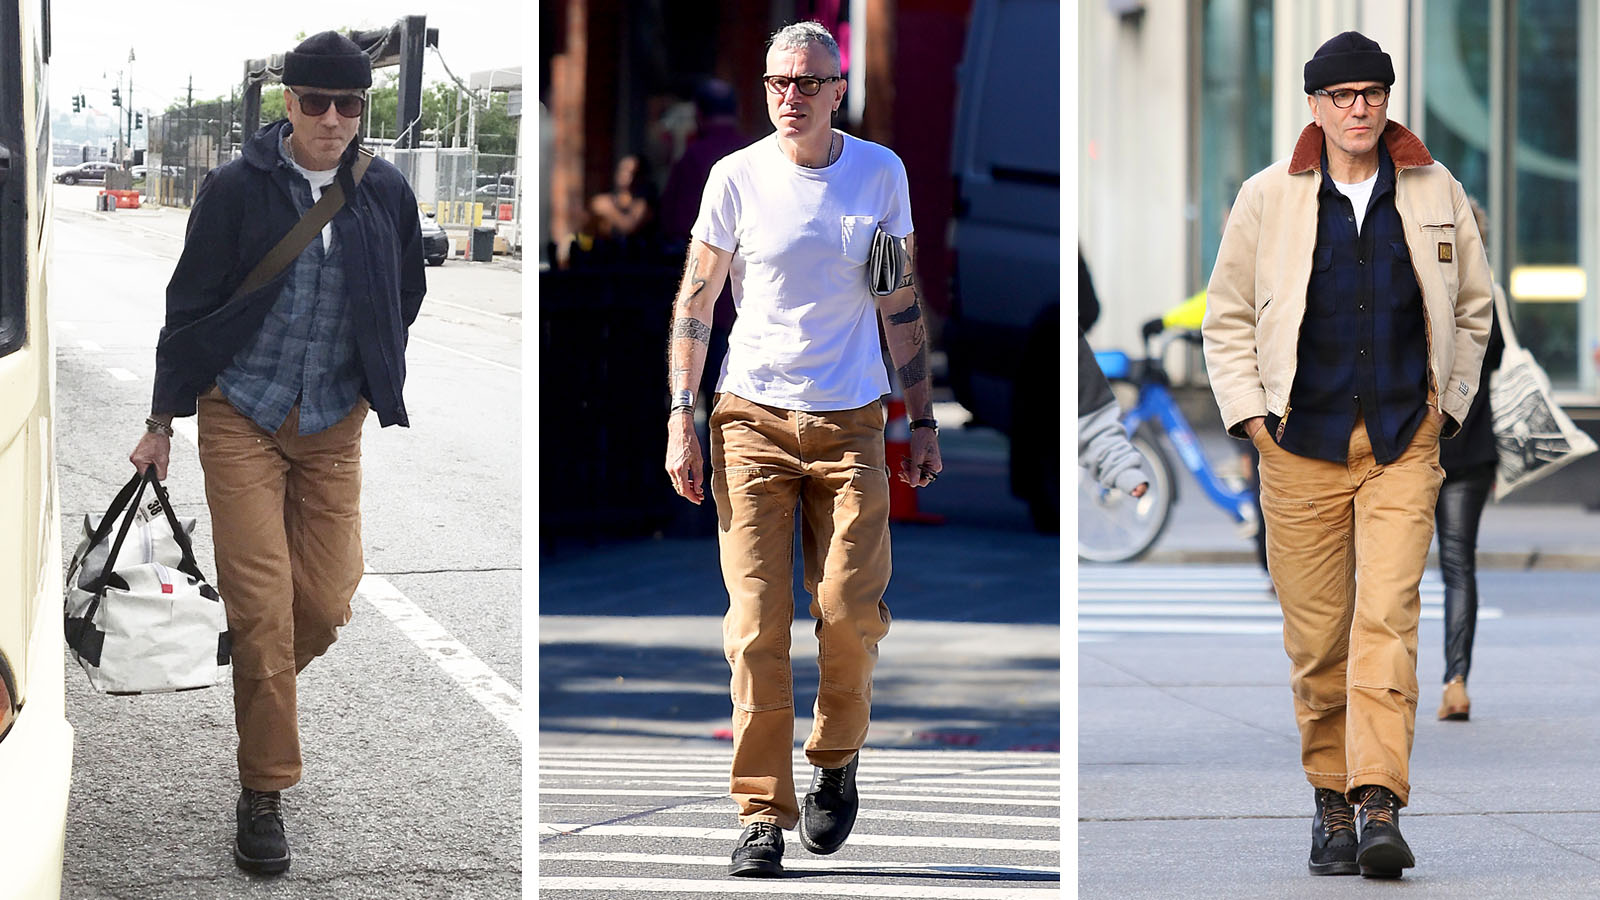 A Lesson In Ageless Style From Sir Daniel Day-Lewis.